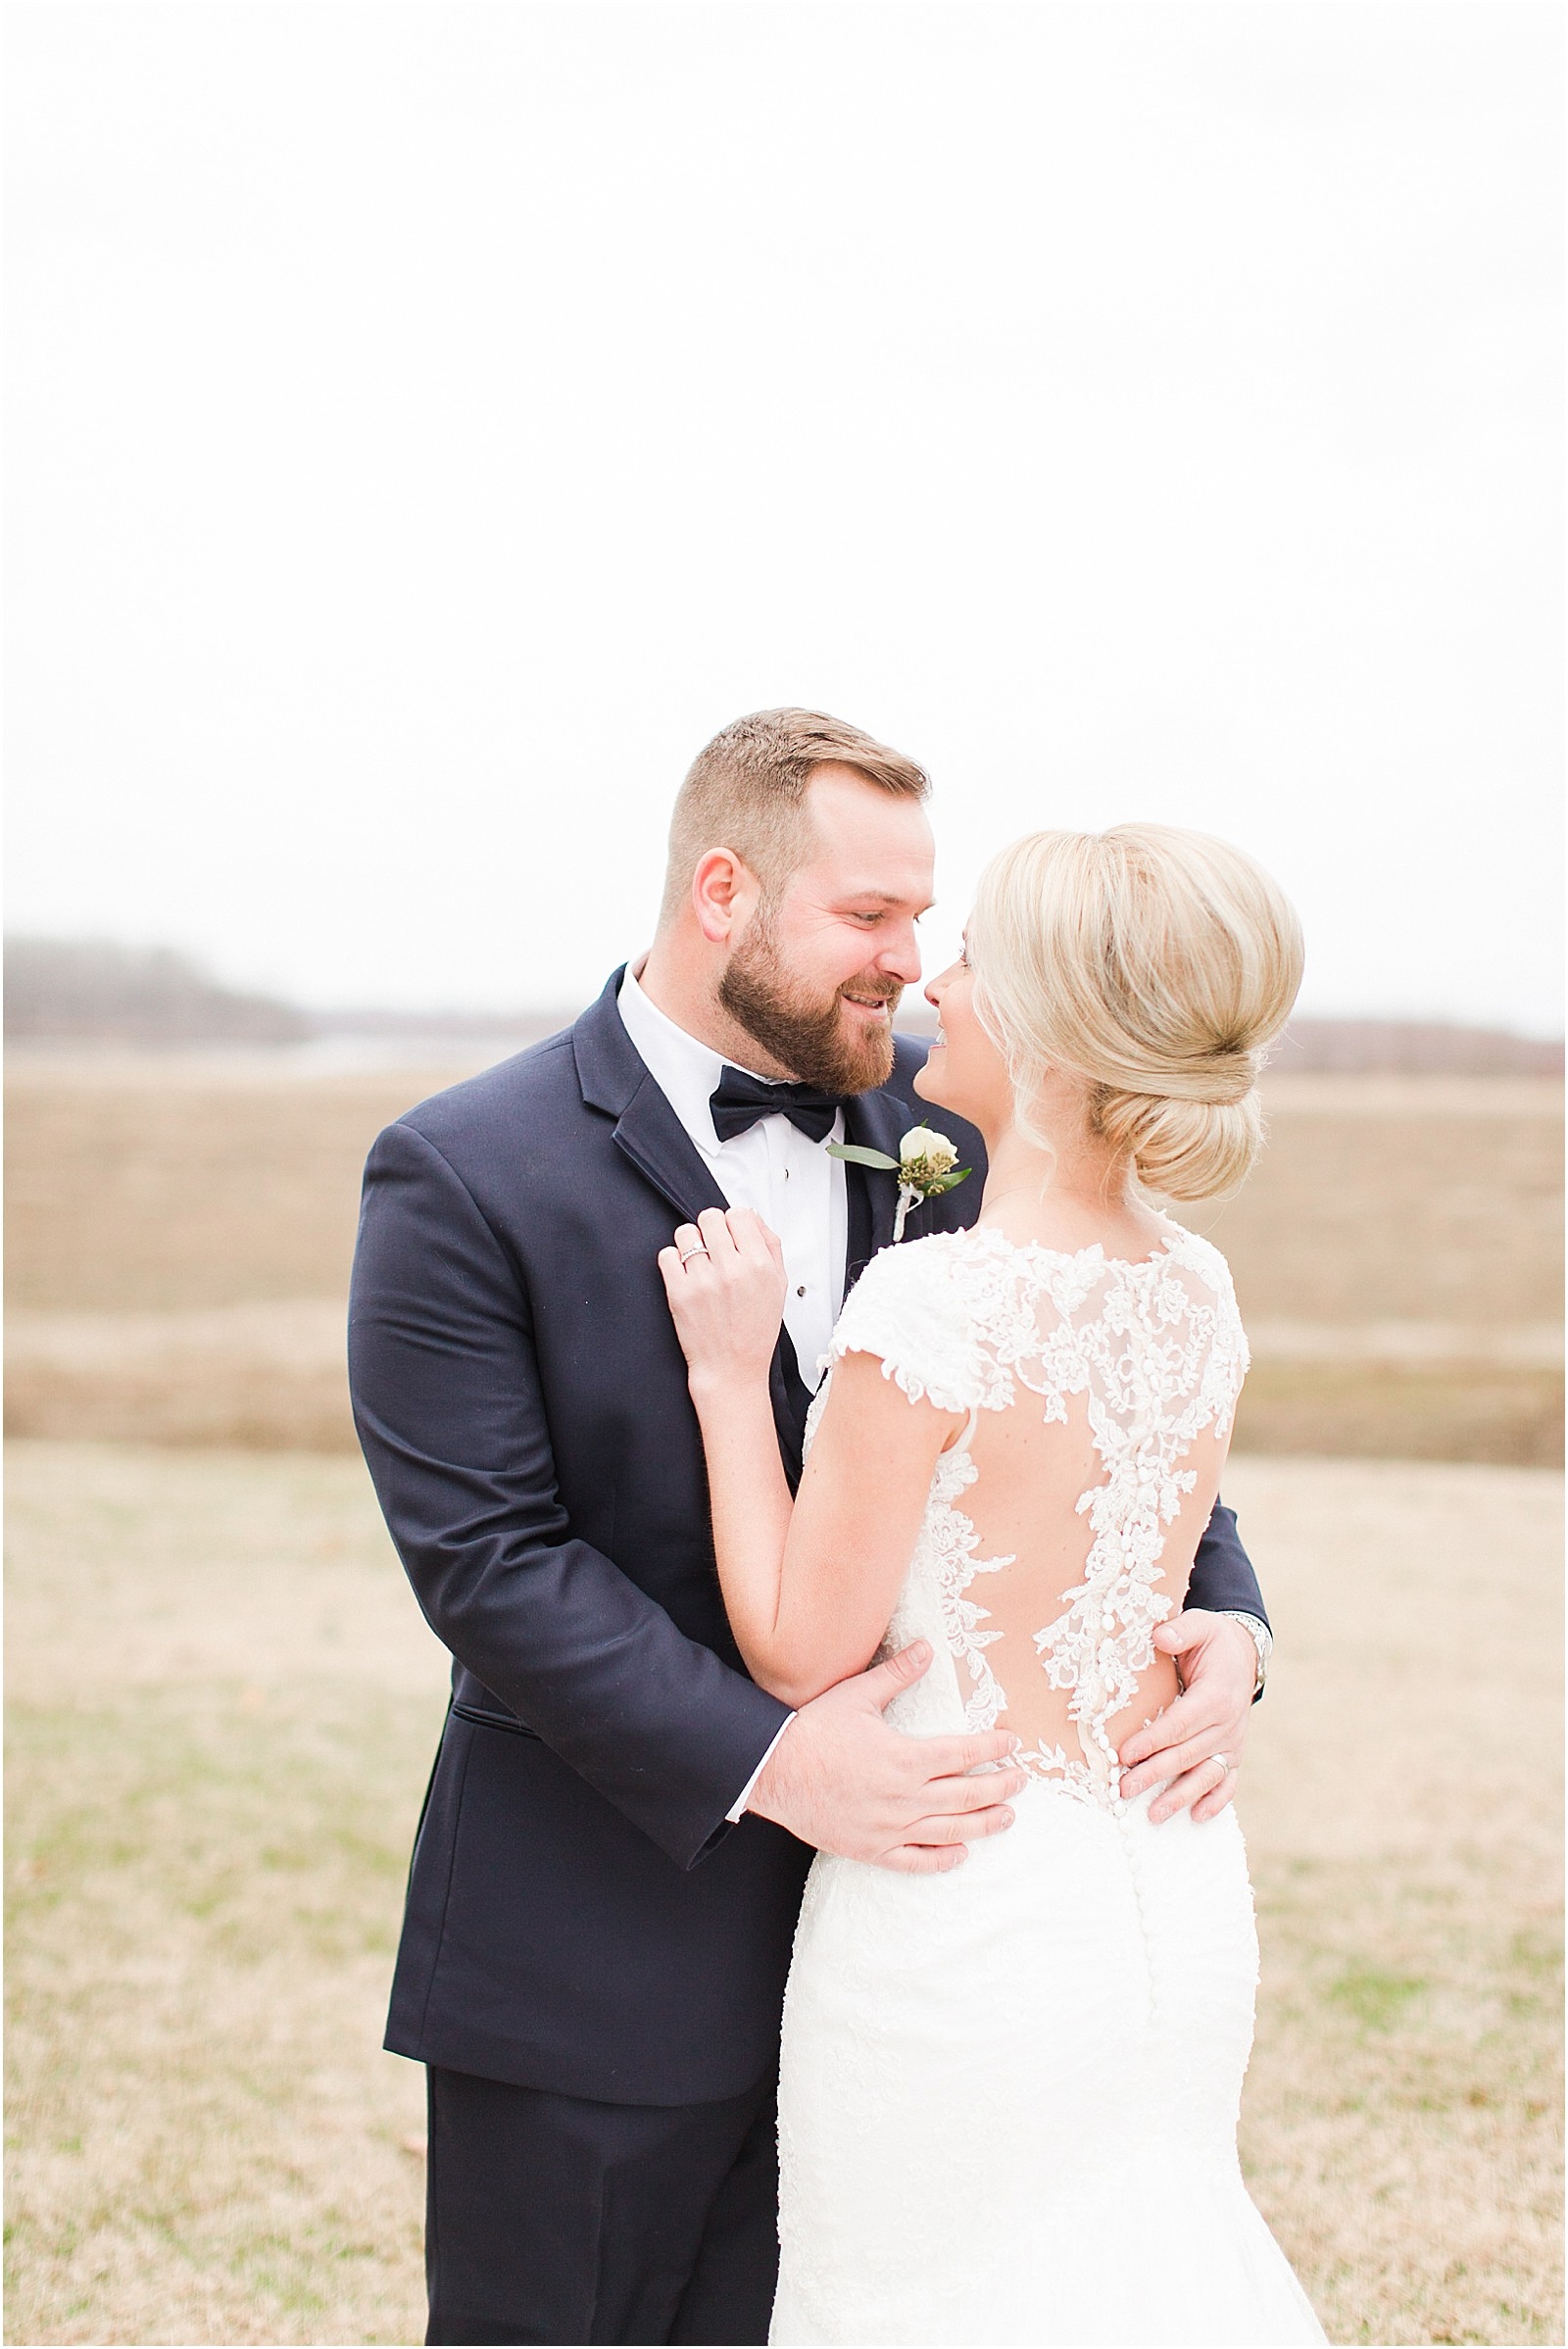 A Classic Winter Wedding in New Harmony | Rachel and Ryan | Bret and Brandie Photography 0097.jpg